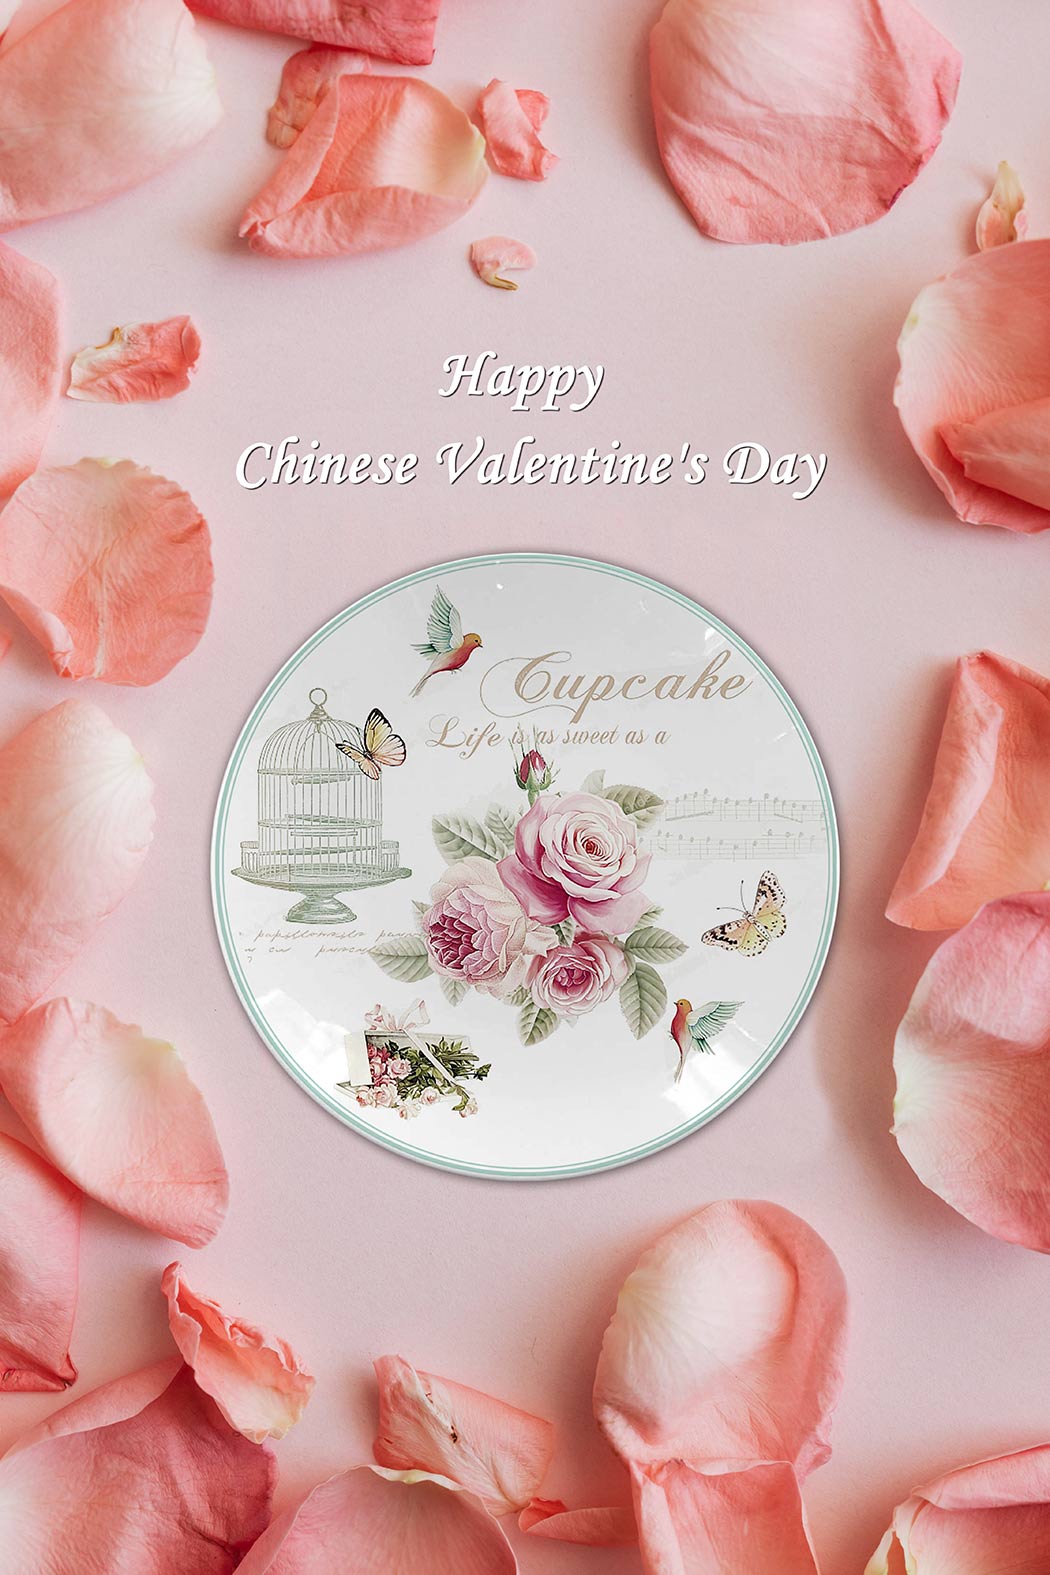 Romantic Valentine’s Plate for lovers2